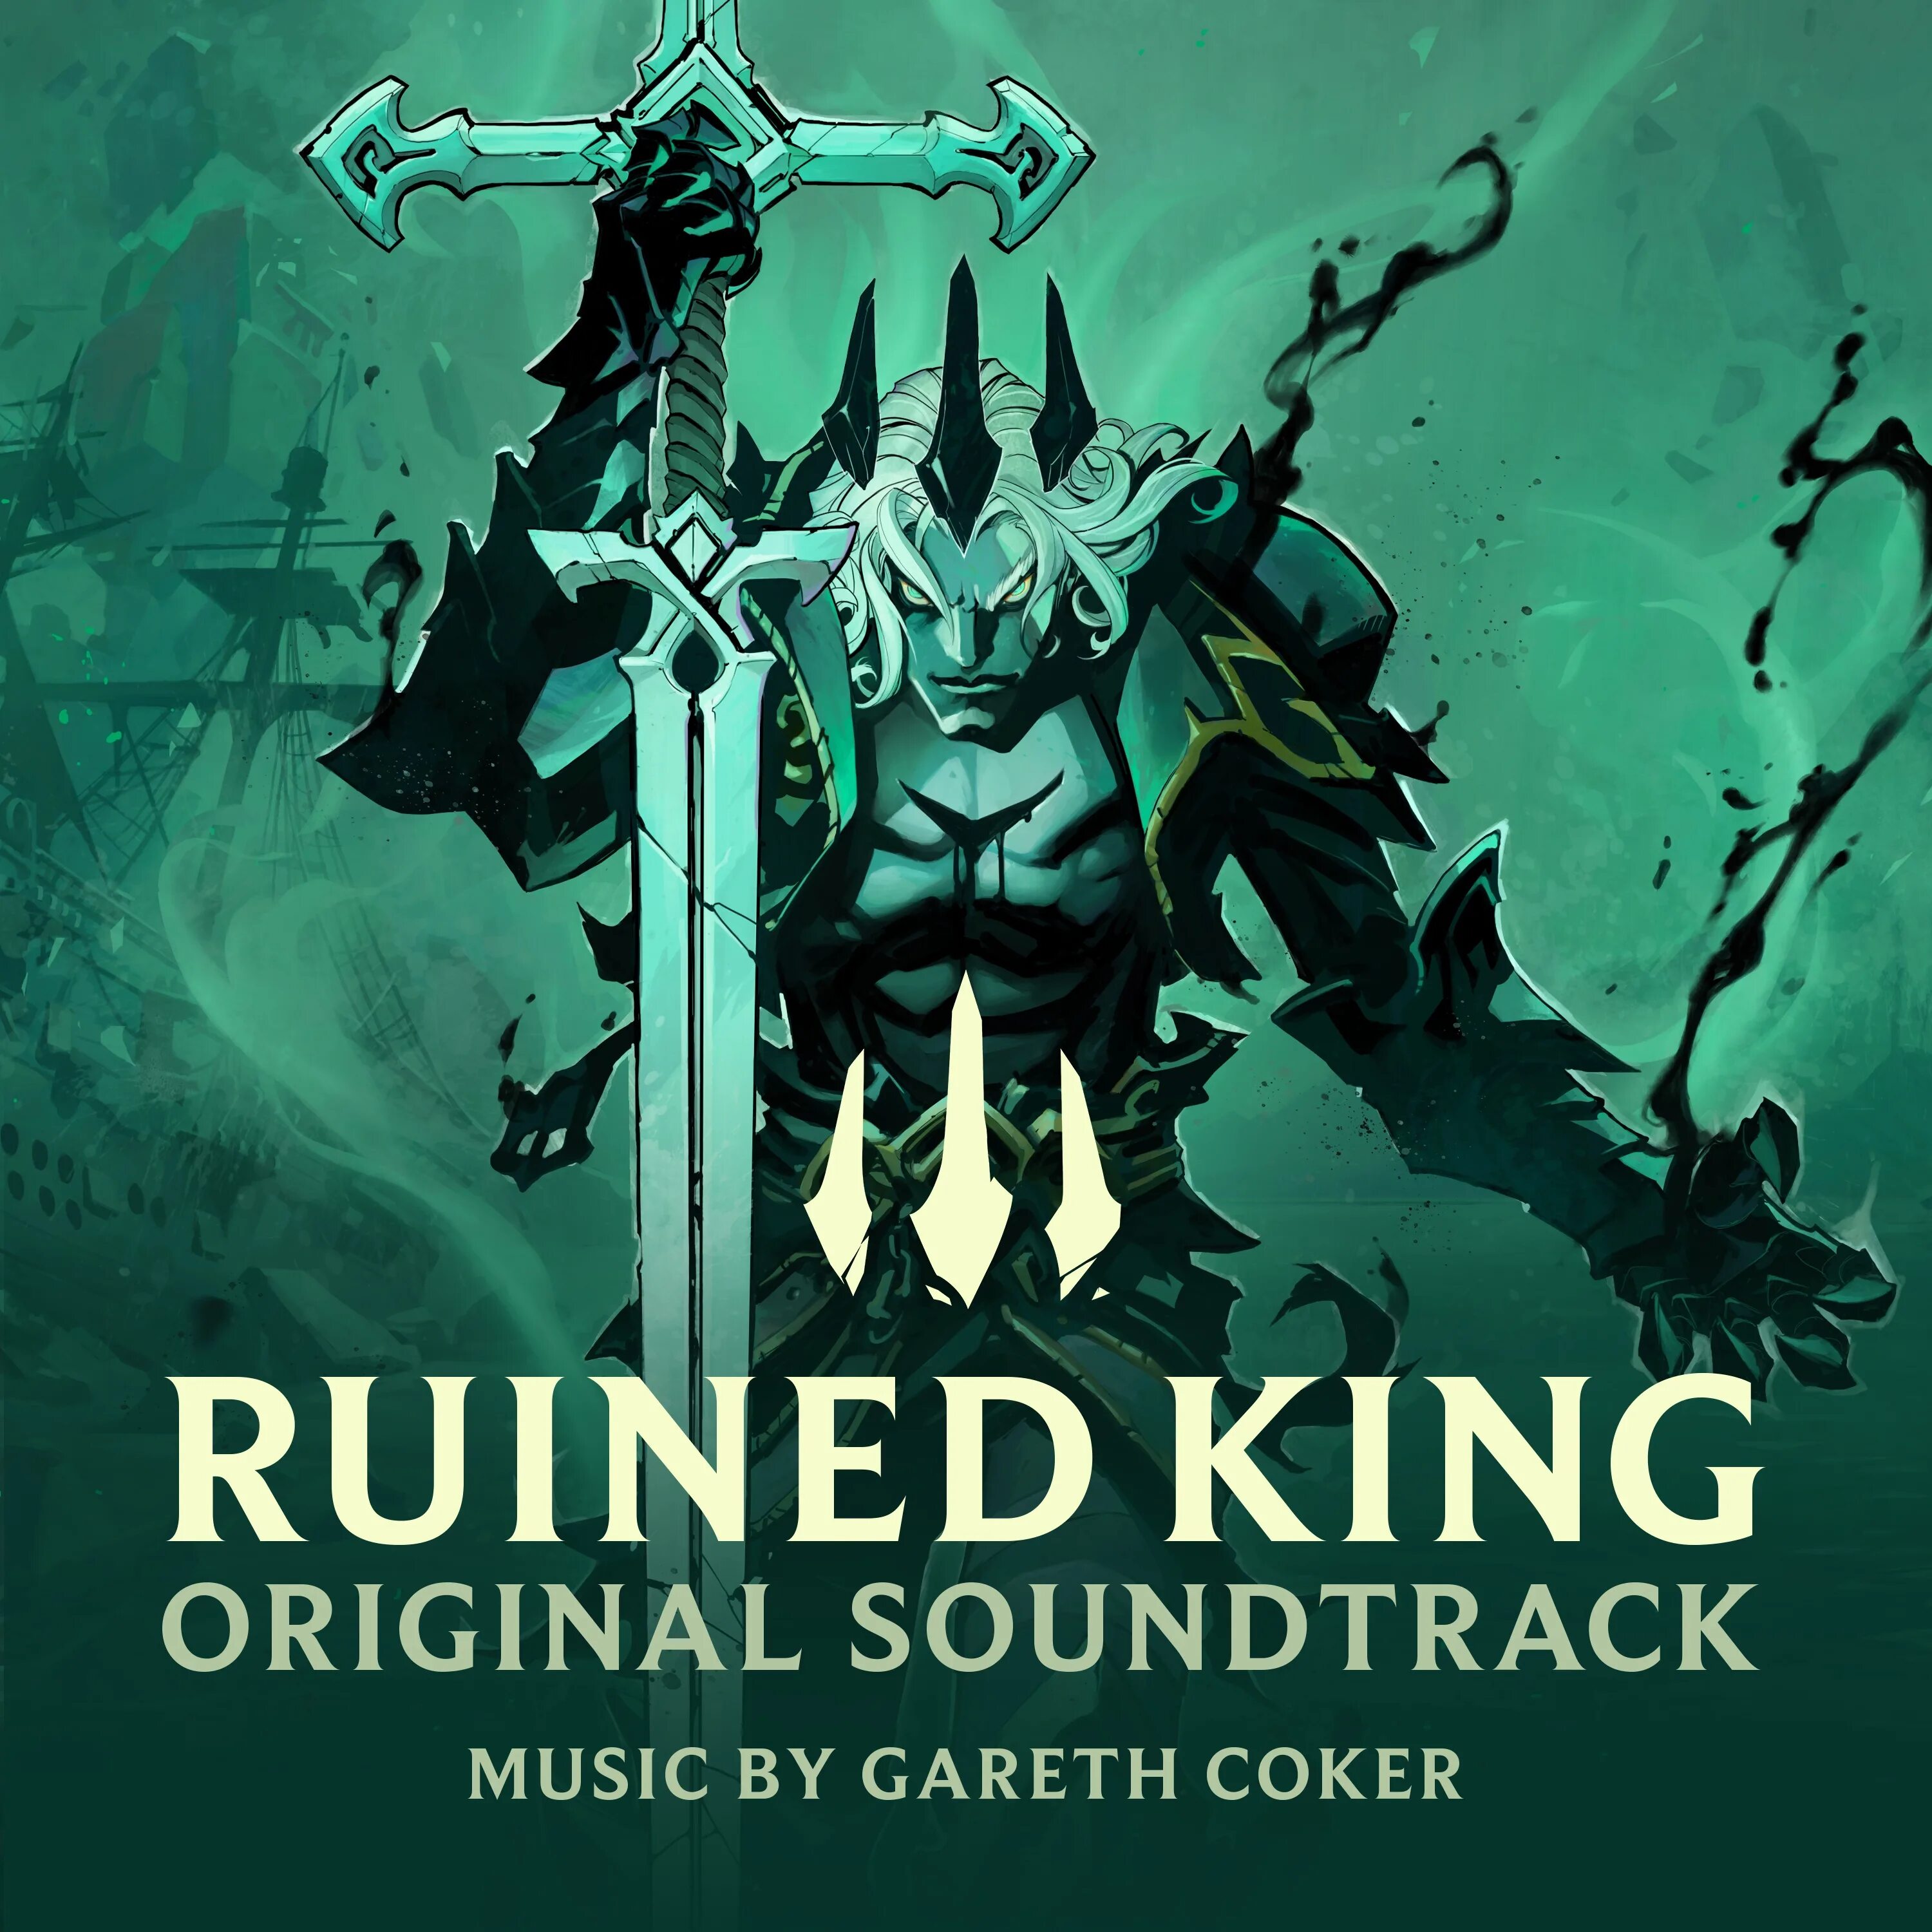 The original king. Ruined King игра. Riot Forge игра. Ruined King Билджвотер. Settling the score Gareth Coker, Riot Forge.